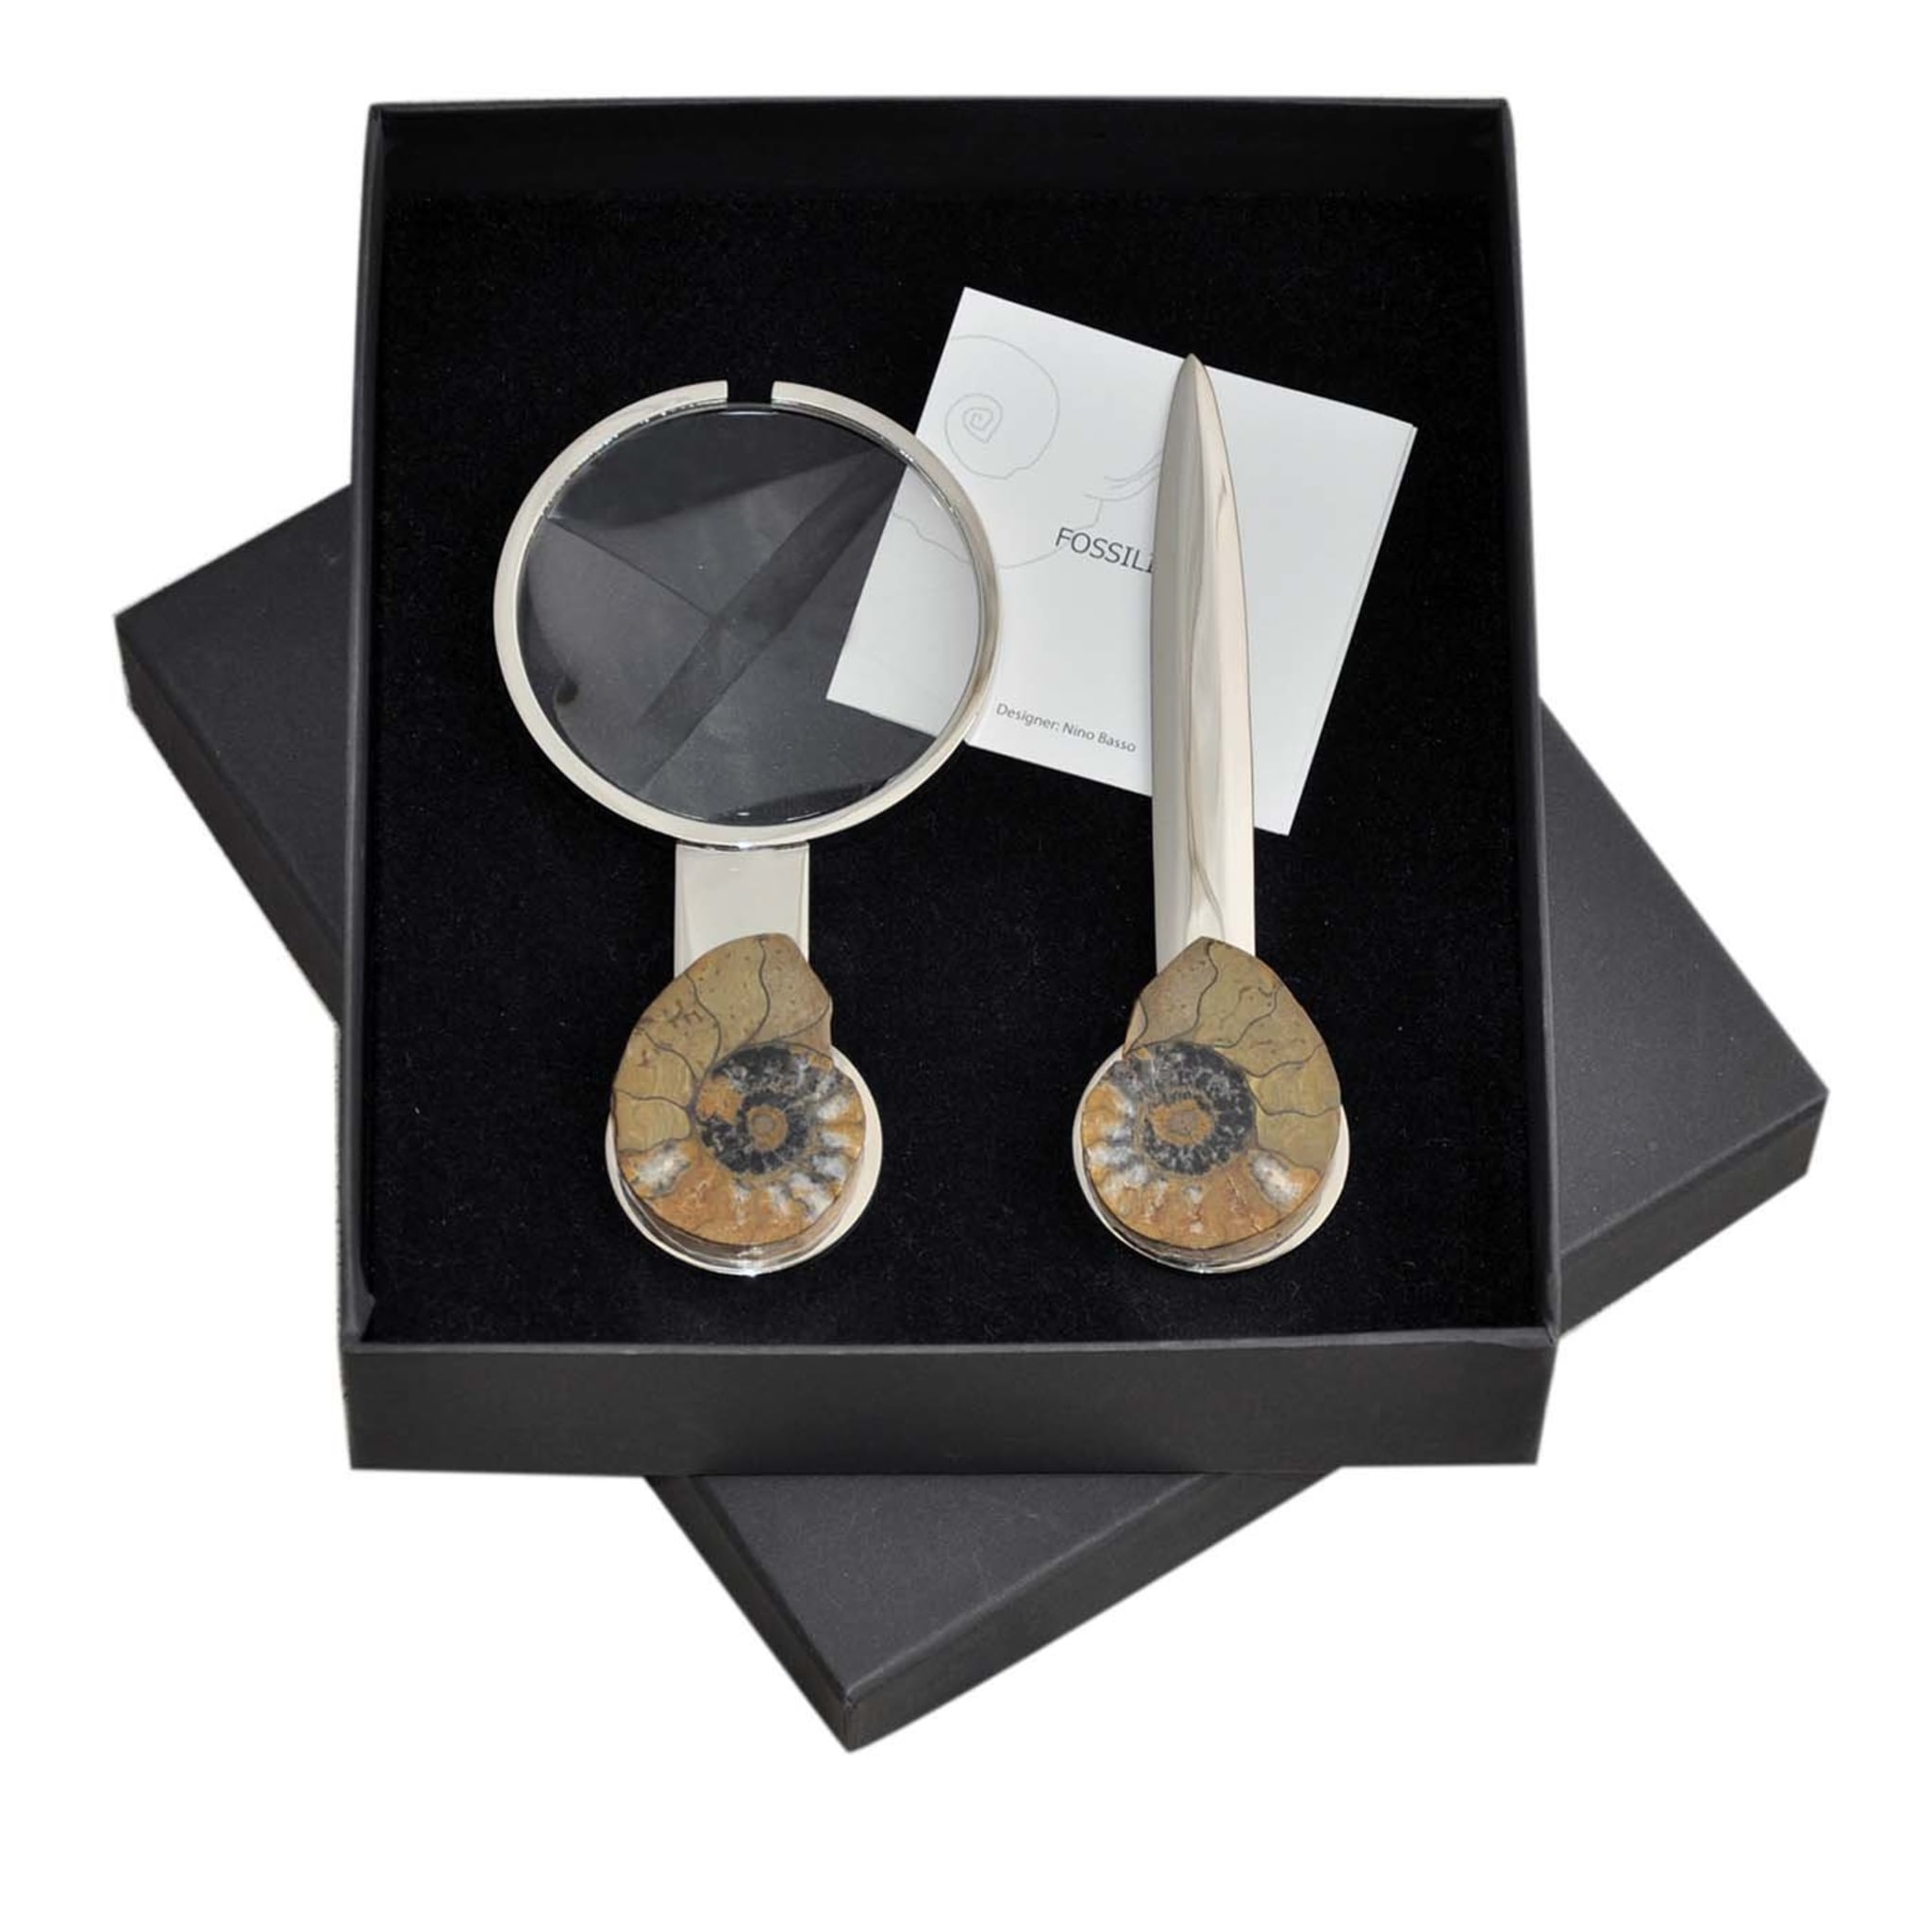 Fossiline Magnifying Glass and Letter Opener Set by Nino Basso - Alternative view 1